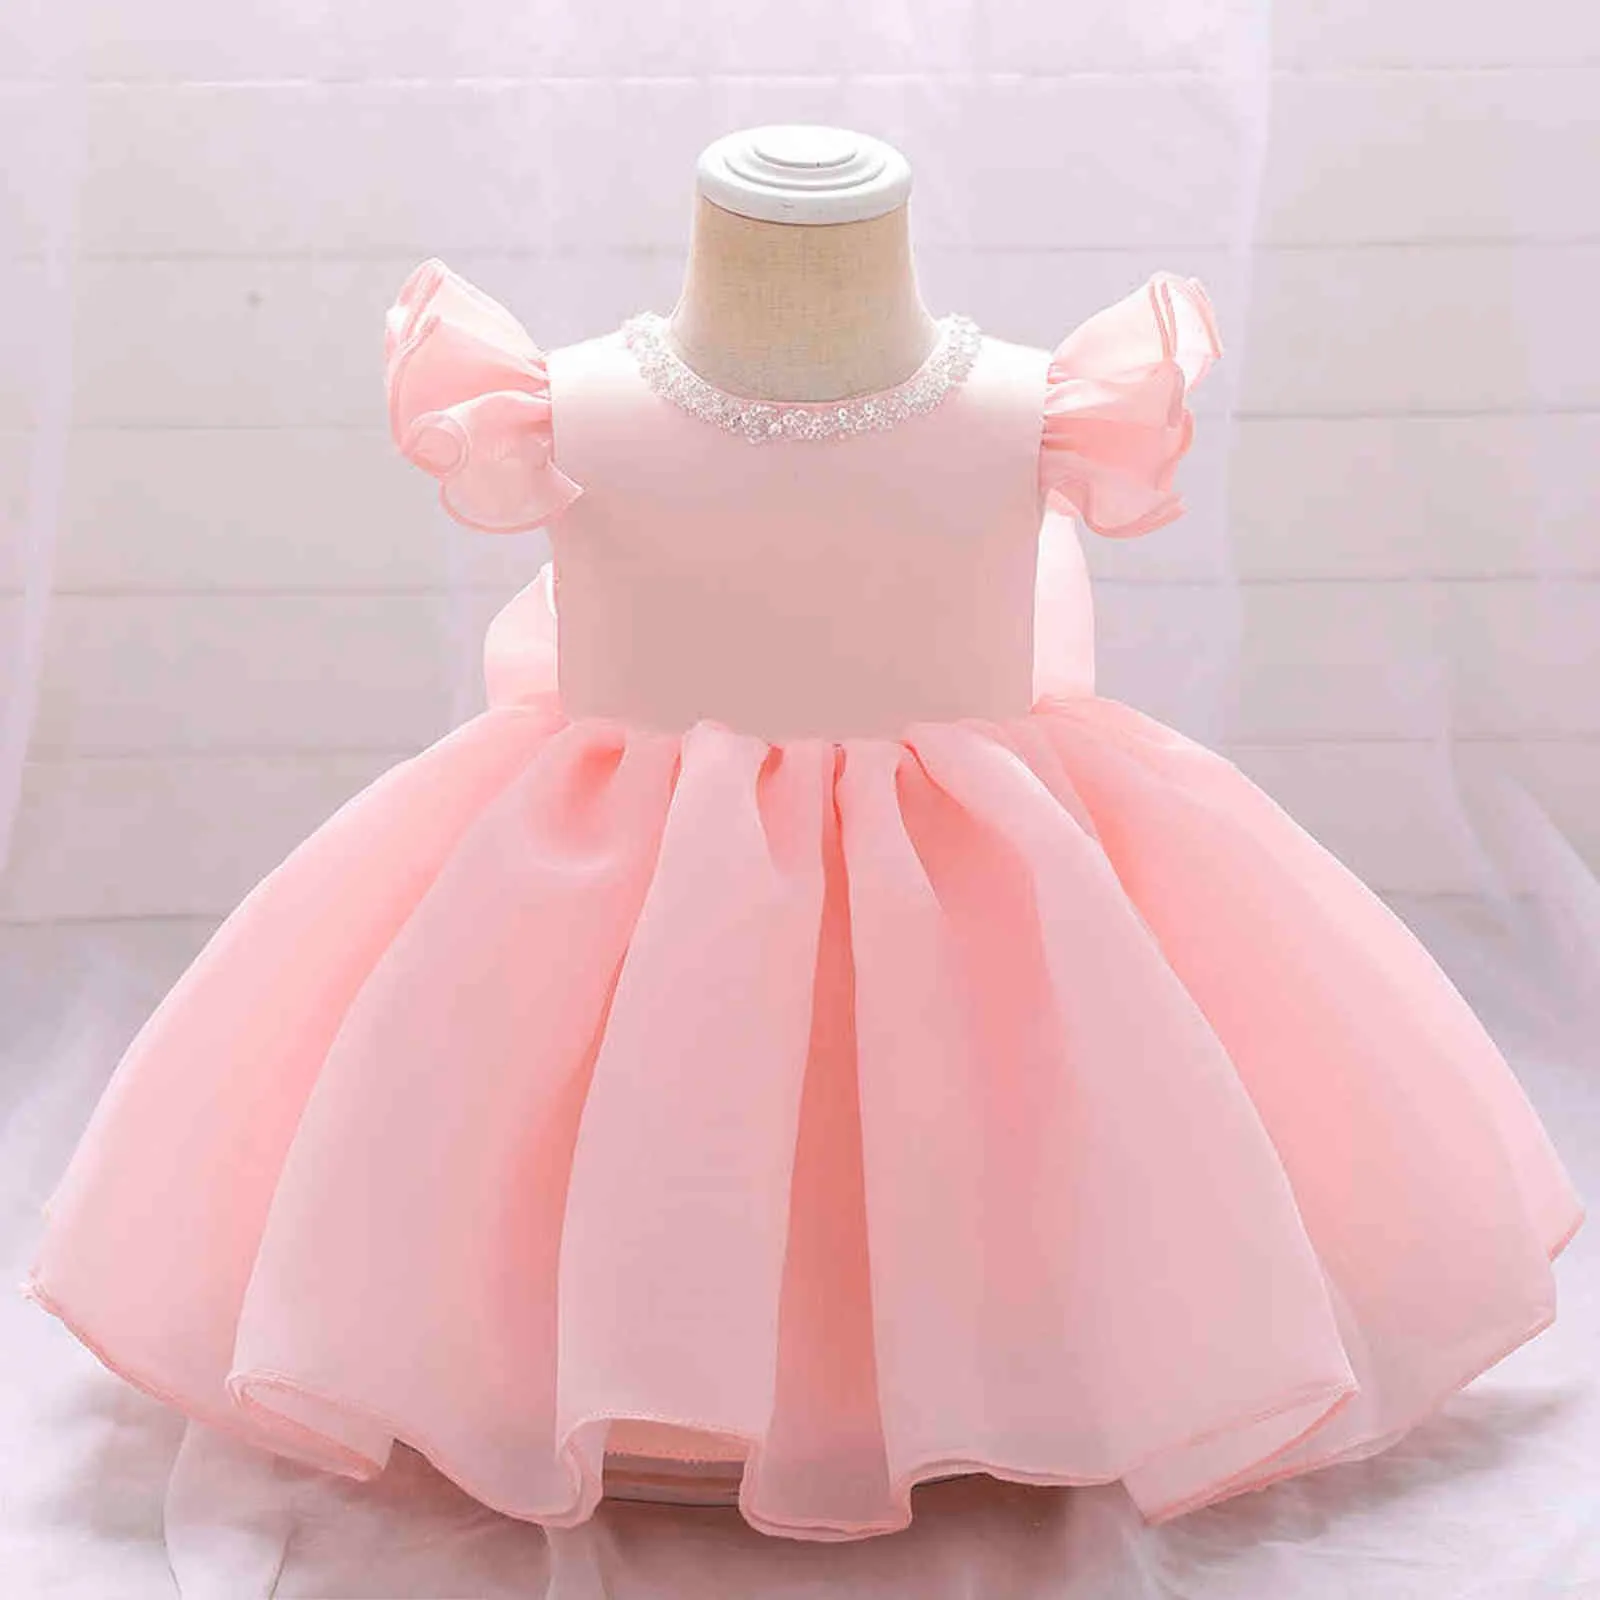 Stunning Sequin Christening Gown For Girls Perfect For First 1st Birthday,  Parties, And On A Special Occasion Toddler Clothes And Infant Vestidos313L  From Oiioq, $25.07 | DHgate.Com